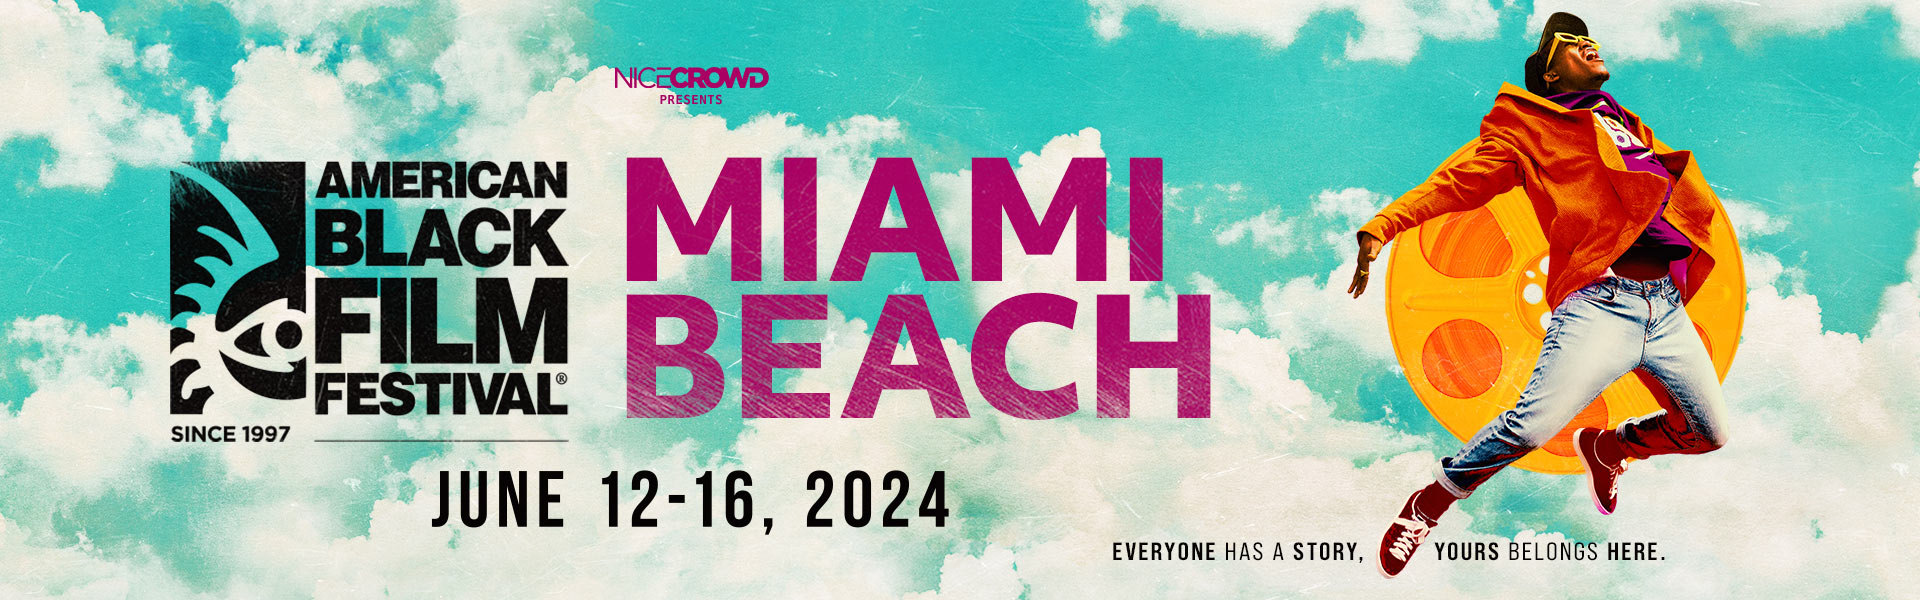 NICE CROWD presents the American Black Film Festival, Miami Beach, June 12-16, 2024. Everyone has a story, yours belongs here.